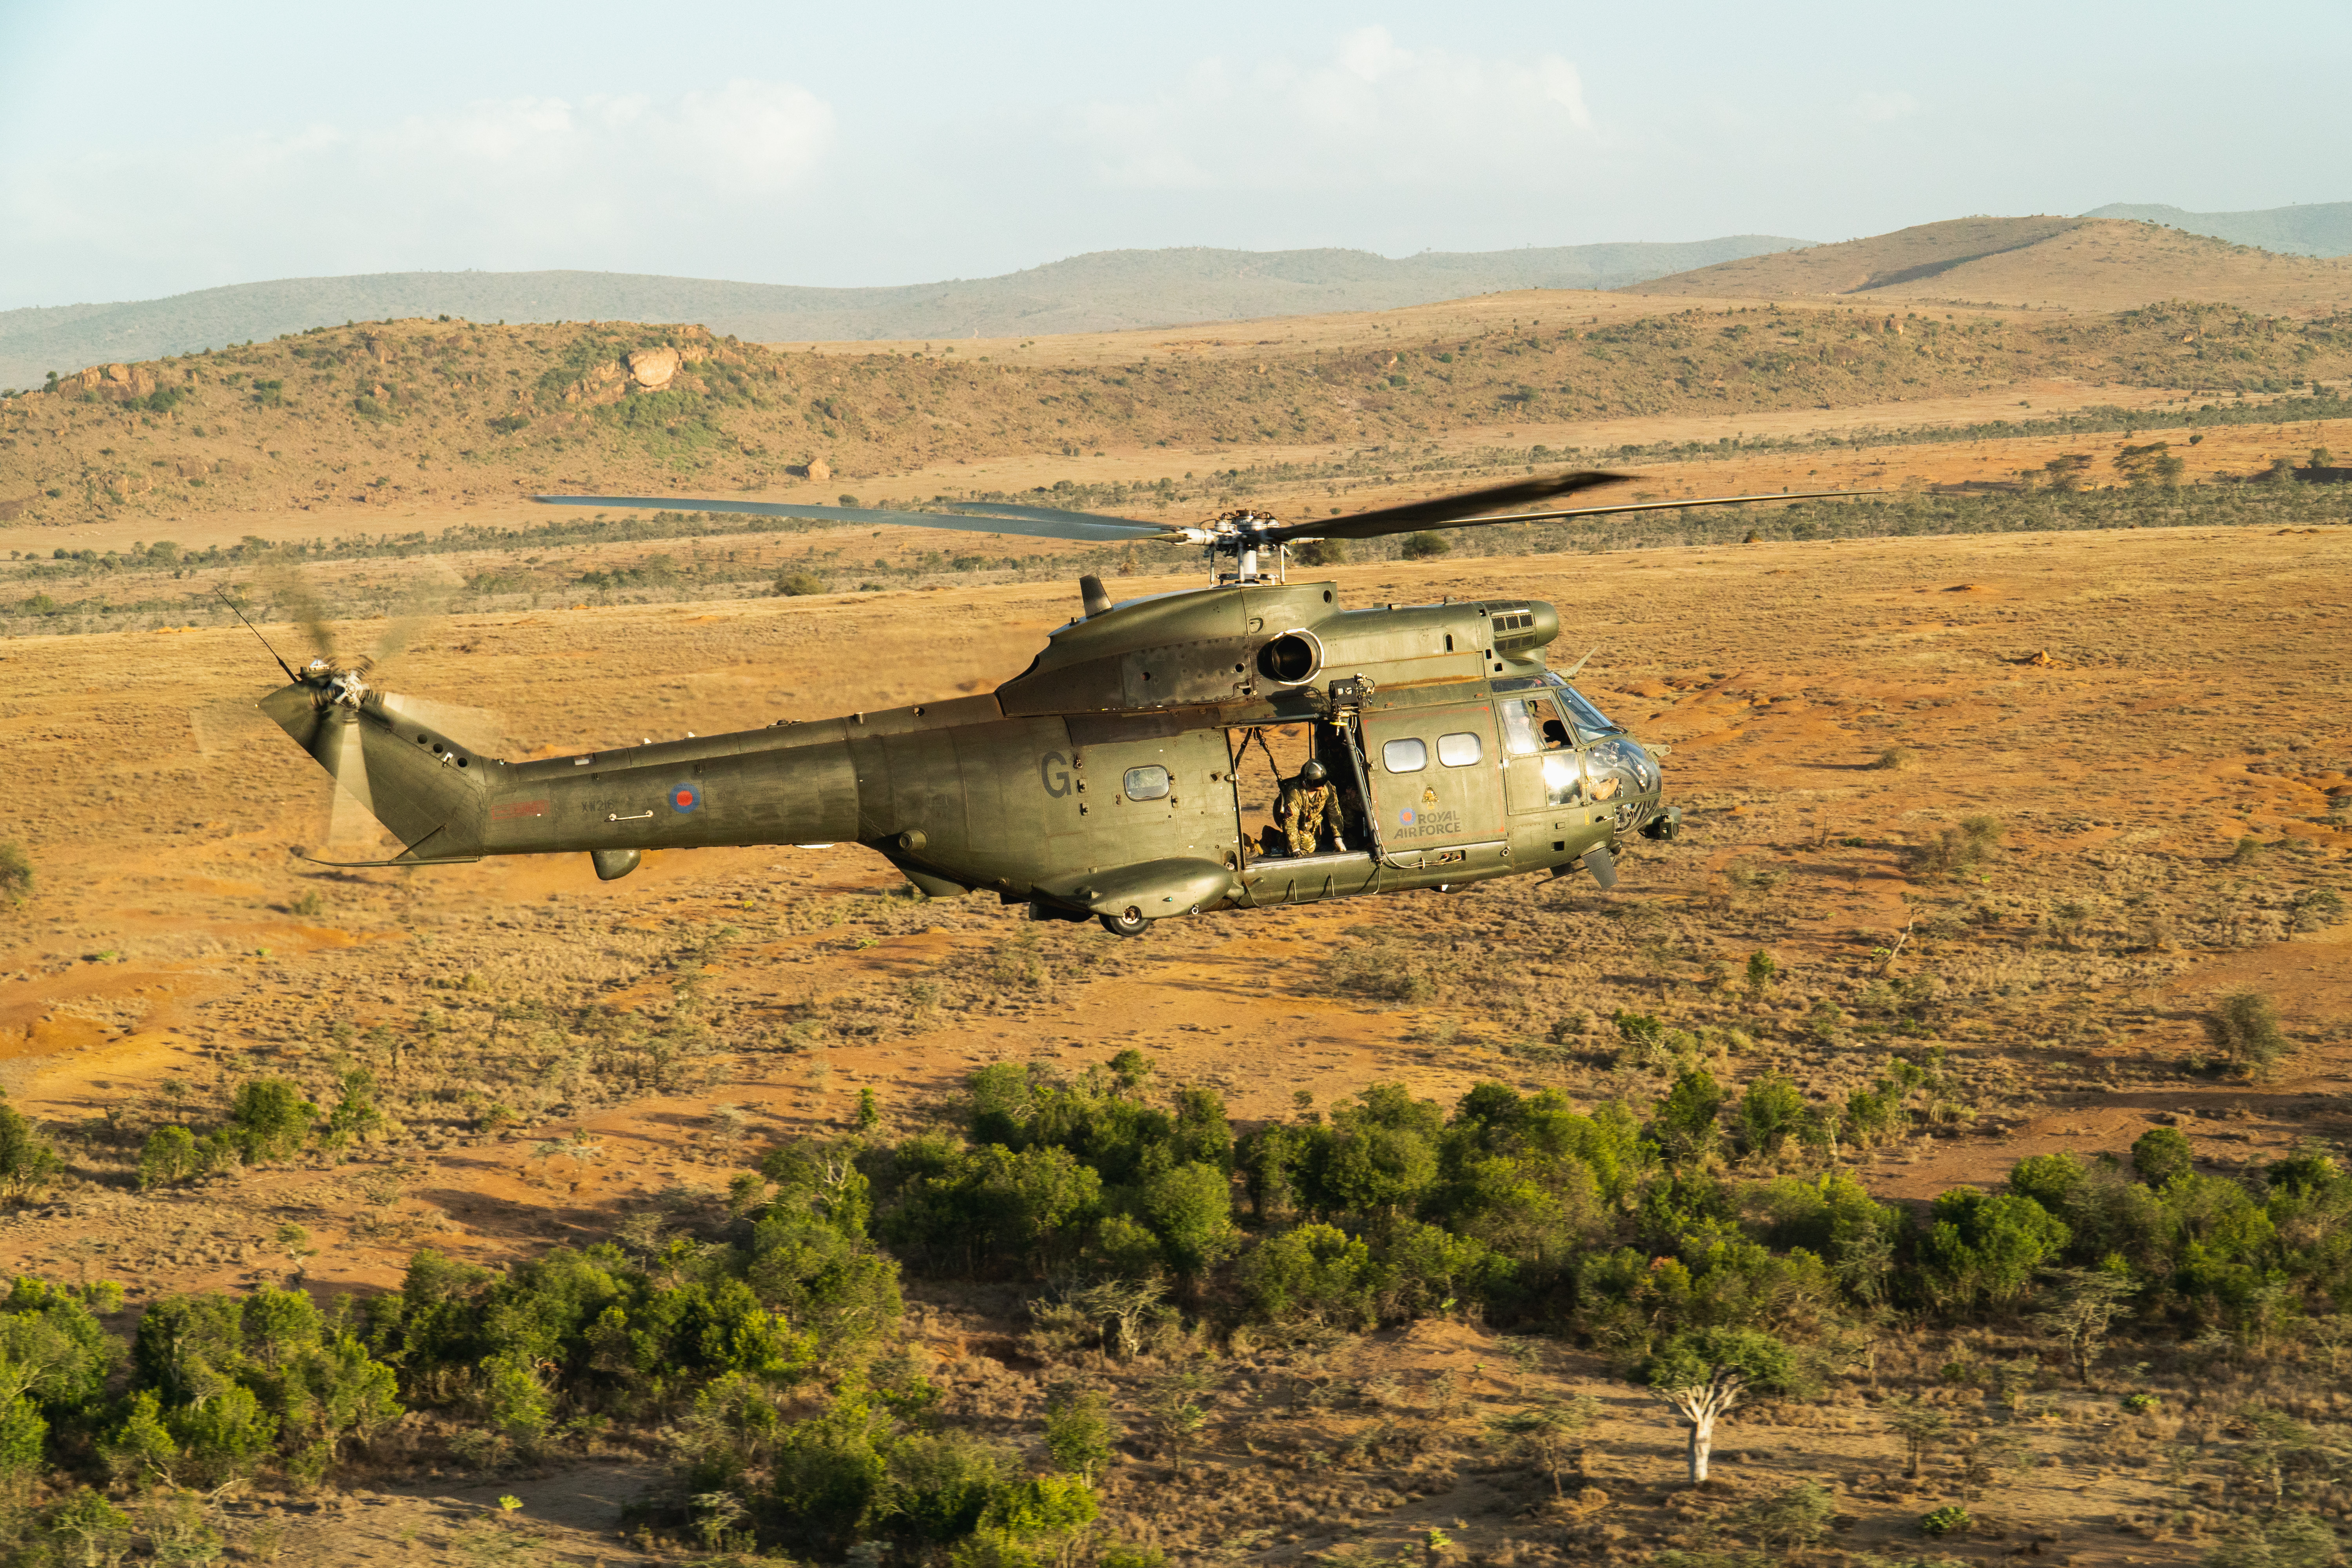 A Puma helicopter transits at low level across the desert, with the crewman visible in the side door looking at the small sections of greenery visible on the ground in amongst the desert.